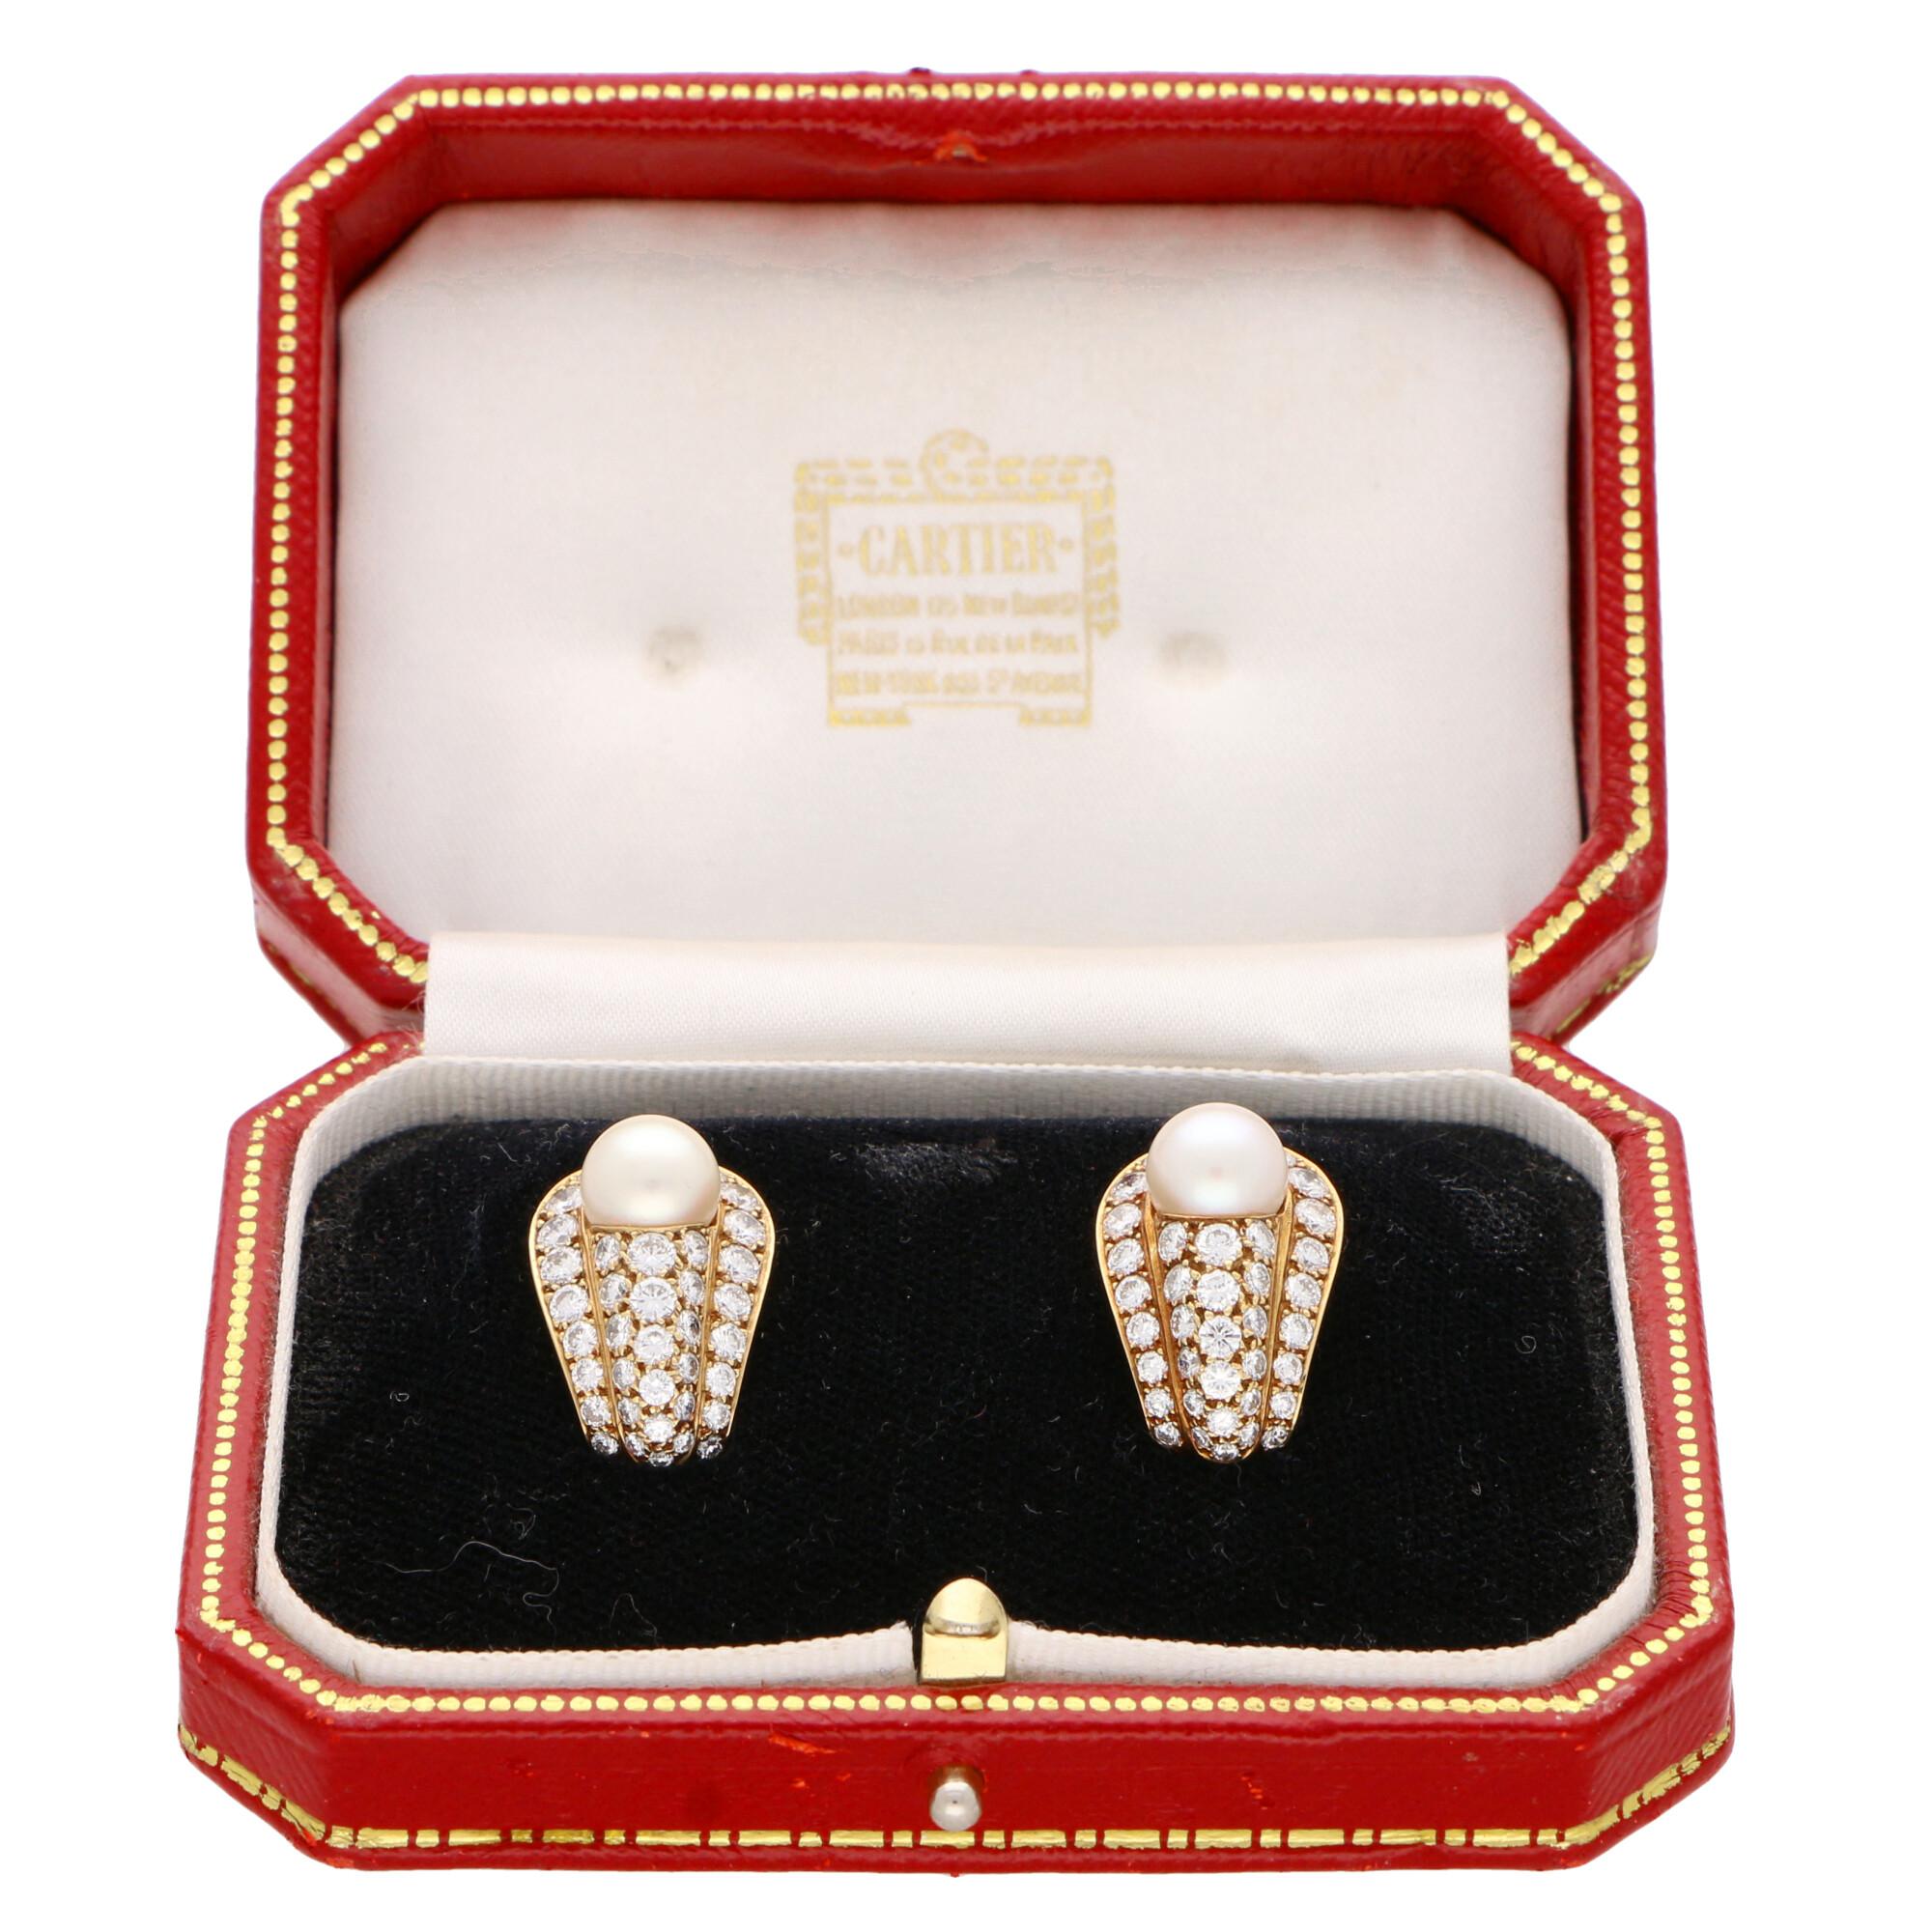 A truly beautiful pair of vintage Cartier pearl and diamond earrings set in 18k yellow gold. 

Each earring is centrally set with a beautiful lustrous 8-8.5 millimetre cream colored pearl. These pearls are each set within a cluster formed of 37